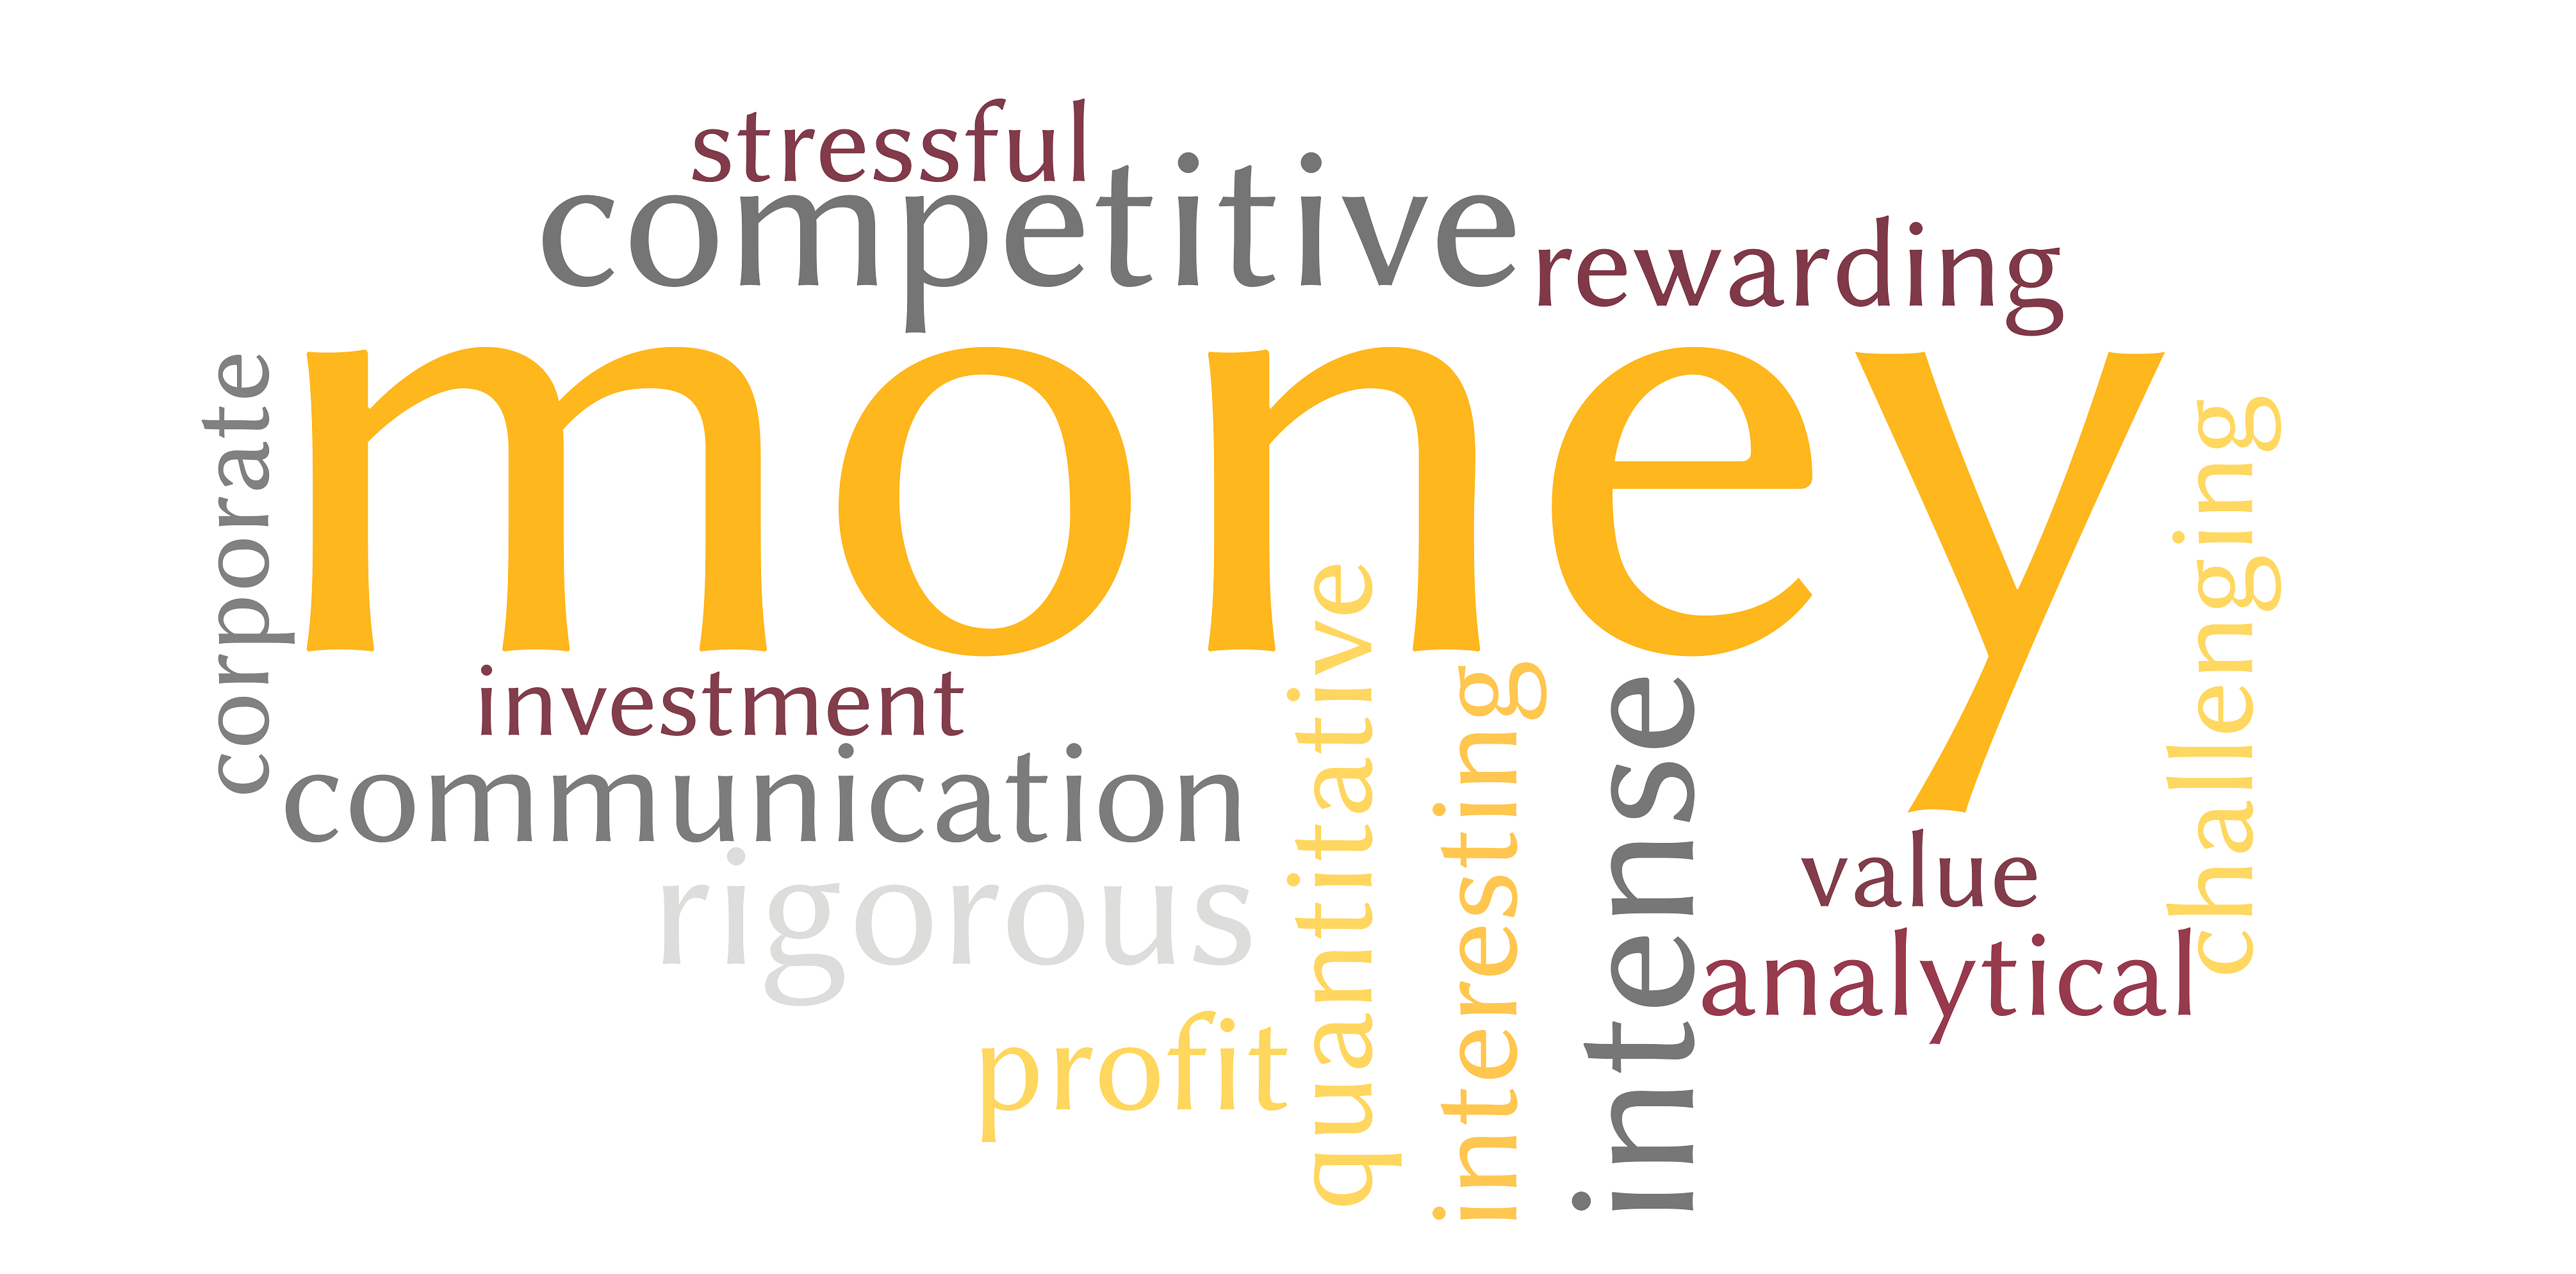 A word cloud of words that undergraduate students said came to mind in association with finance. Money, competitive, stressful, and intense were the most popular, along with several other words such as communication, rewarding, profit, investment, etc.